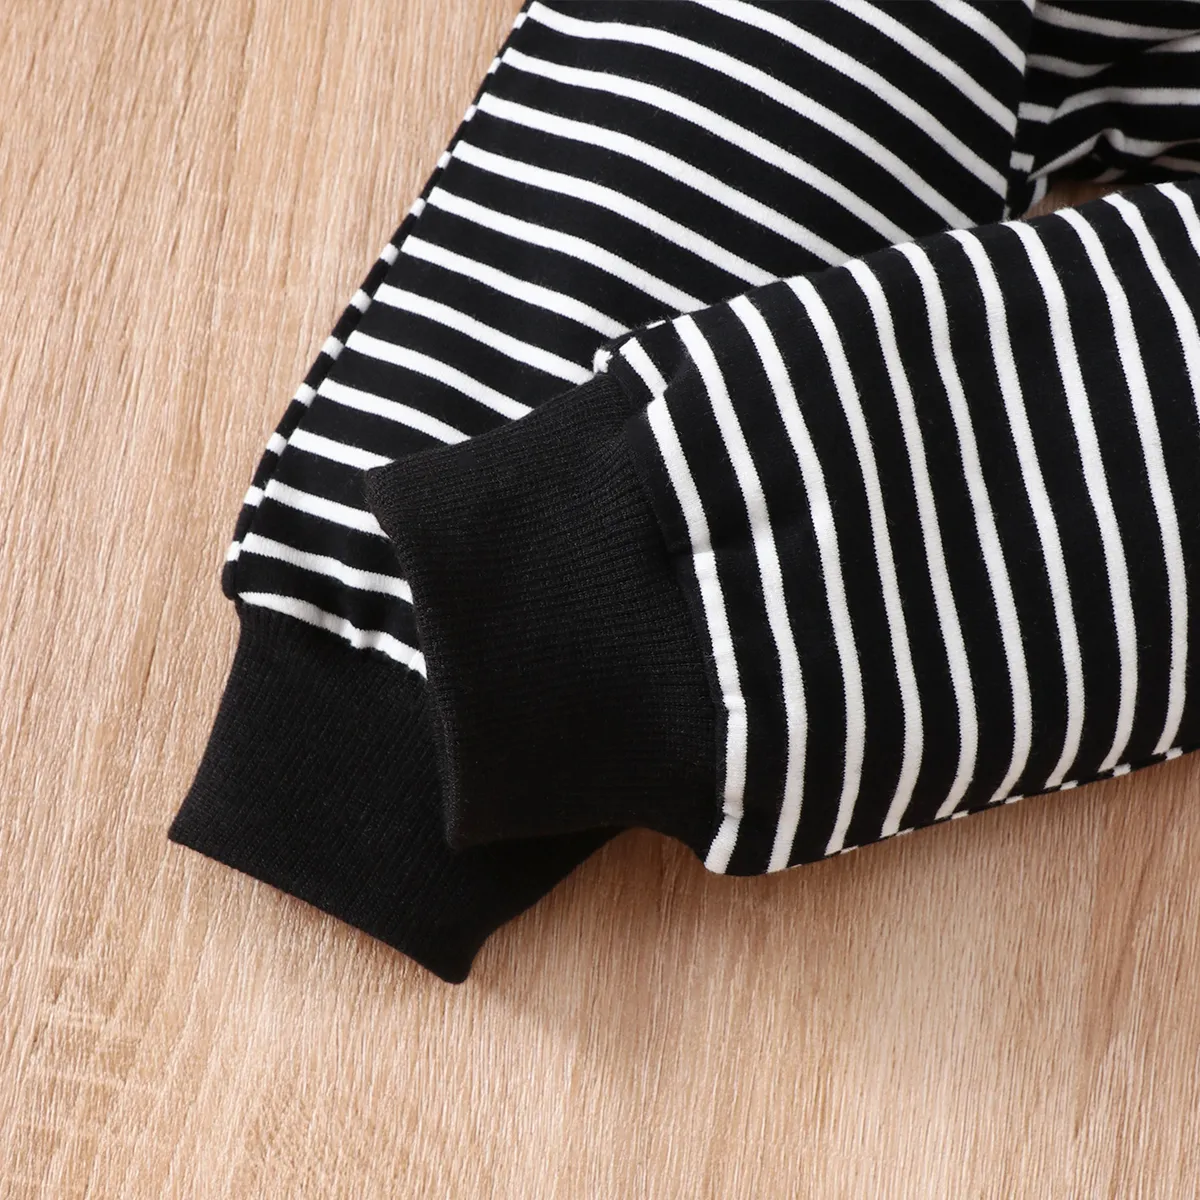 2pcs Baby 95% Cotton Long-sleeve All Over Striped Pullover and Trousers Set Black big image 1